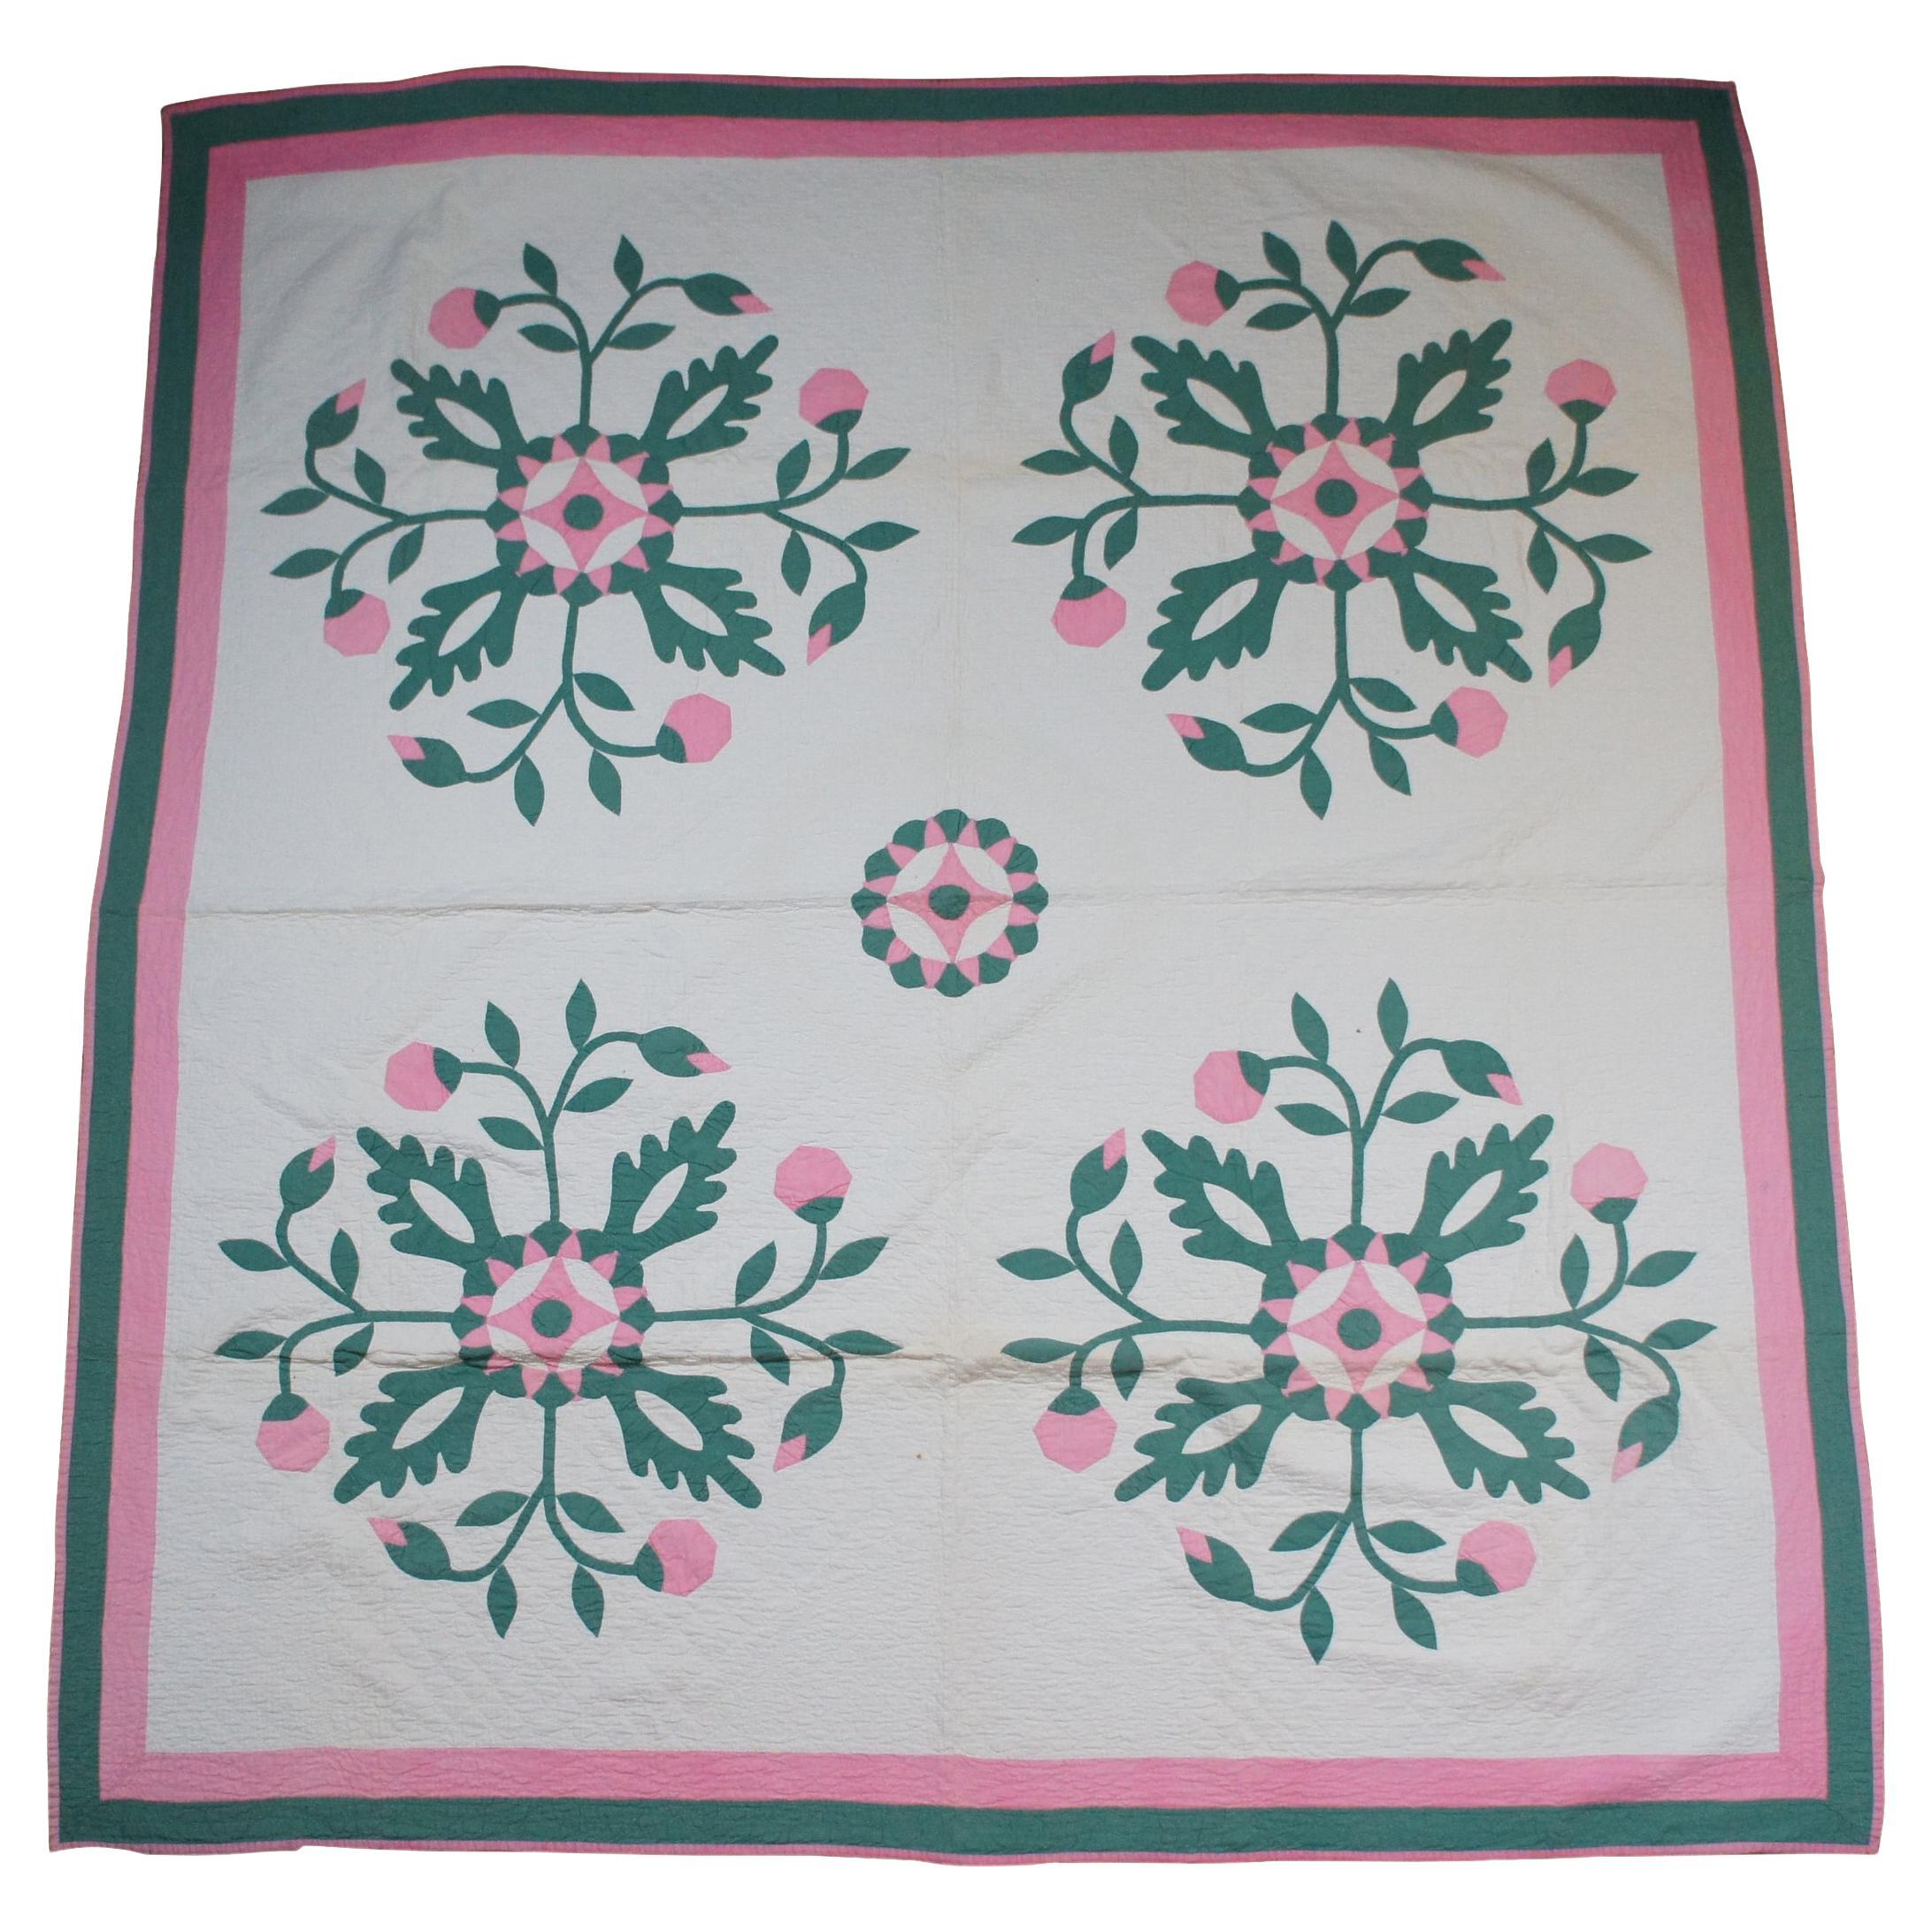 Antique Hand Stitched Rose of Sharon Quilt Bedspread Pink Green